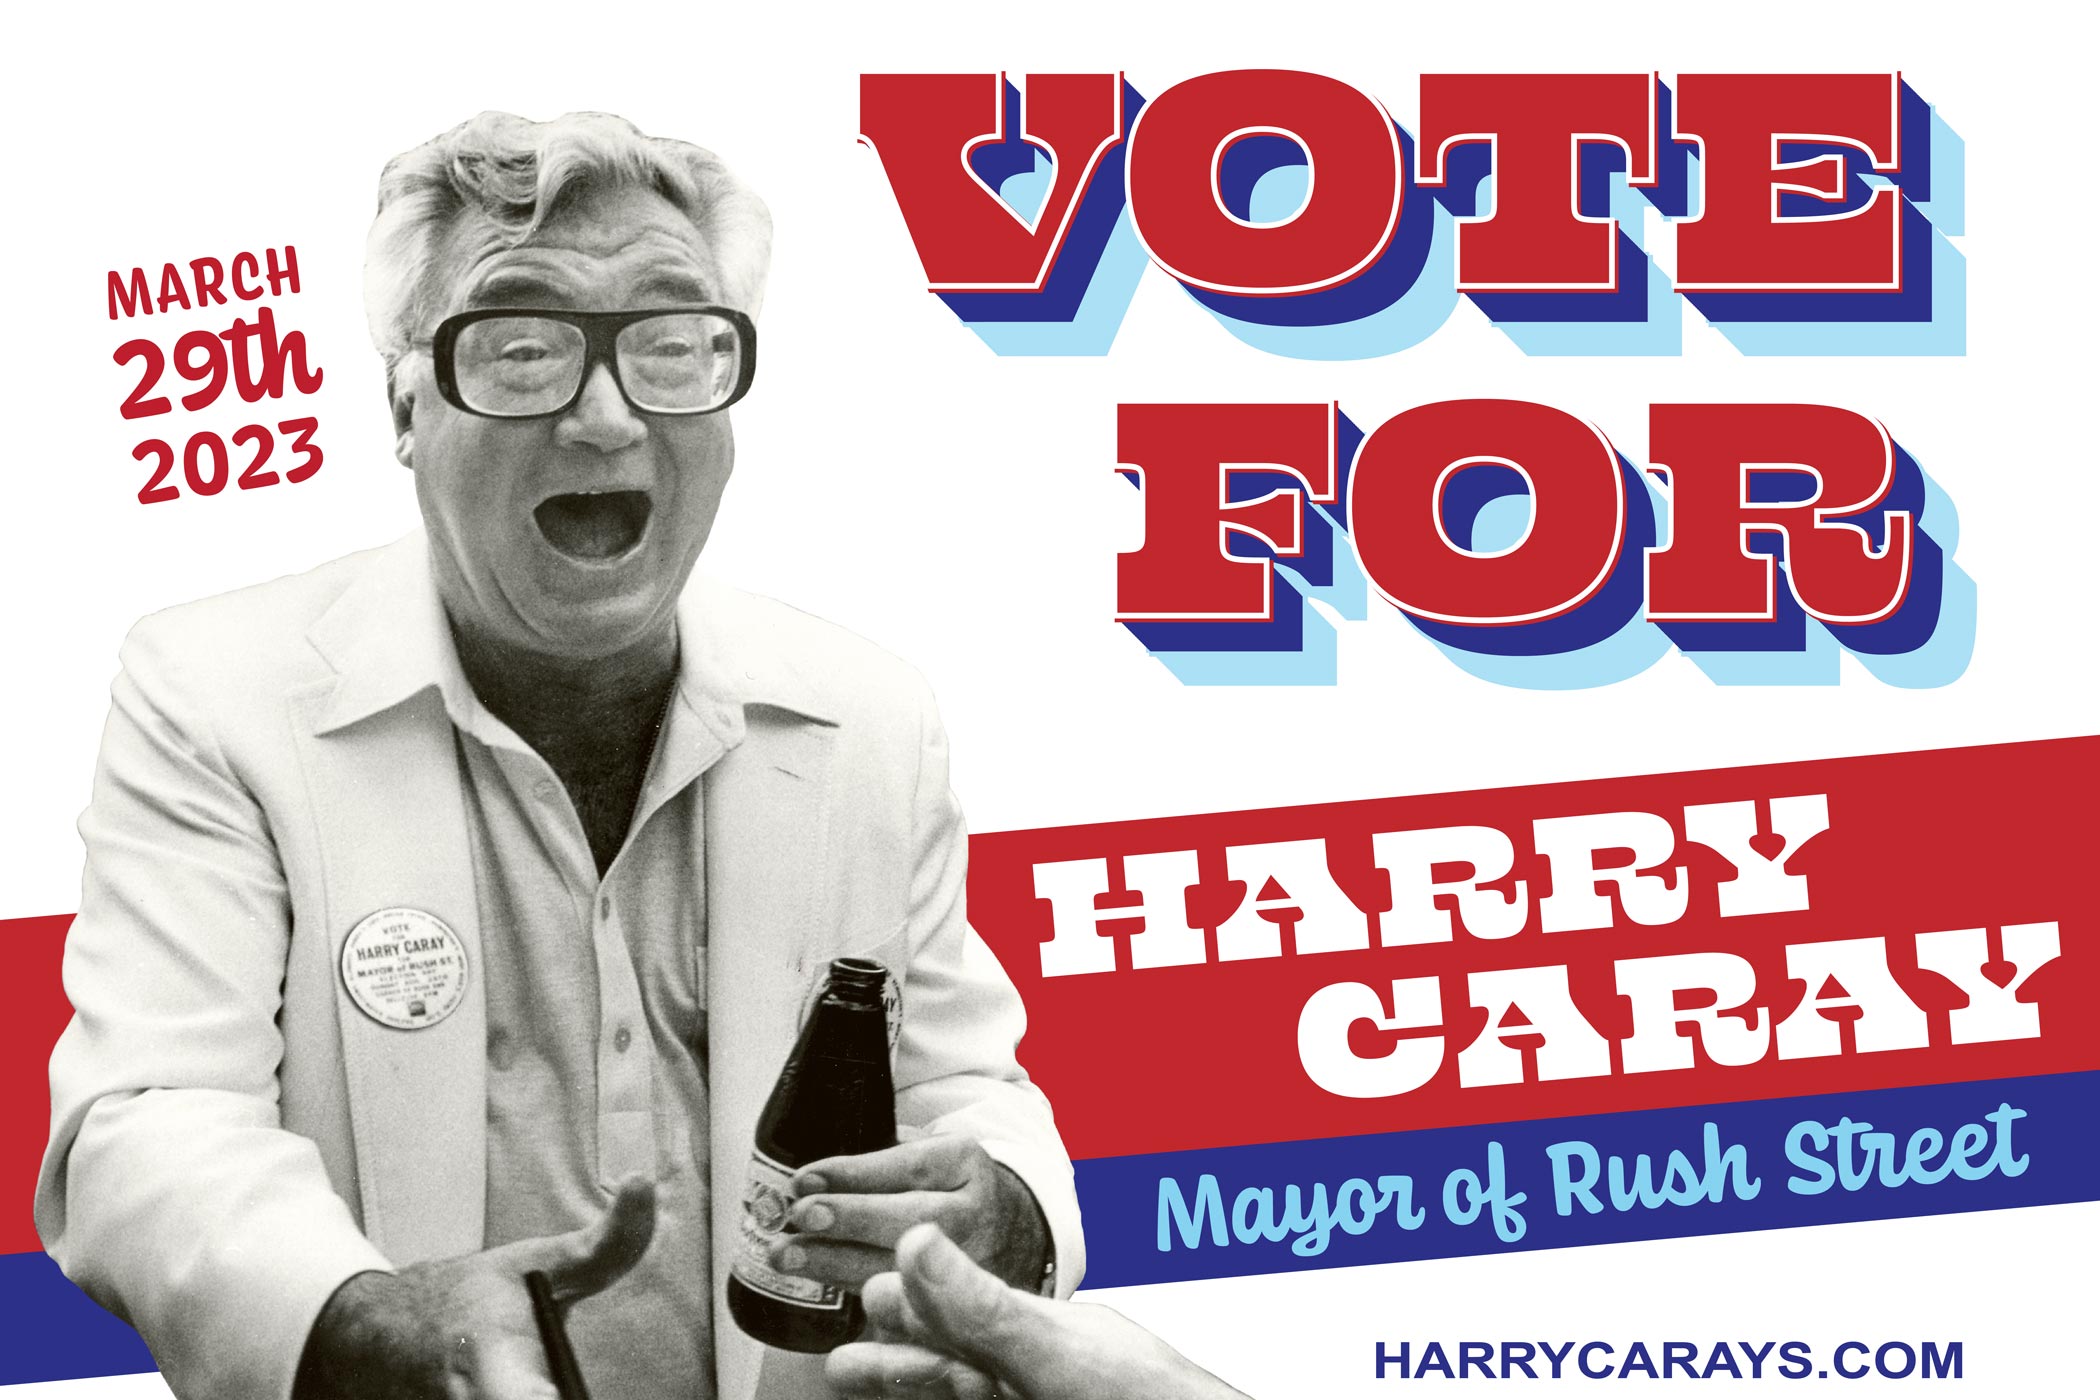 Vote for Harry Caray